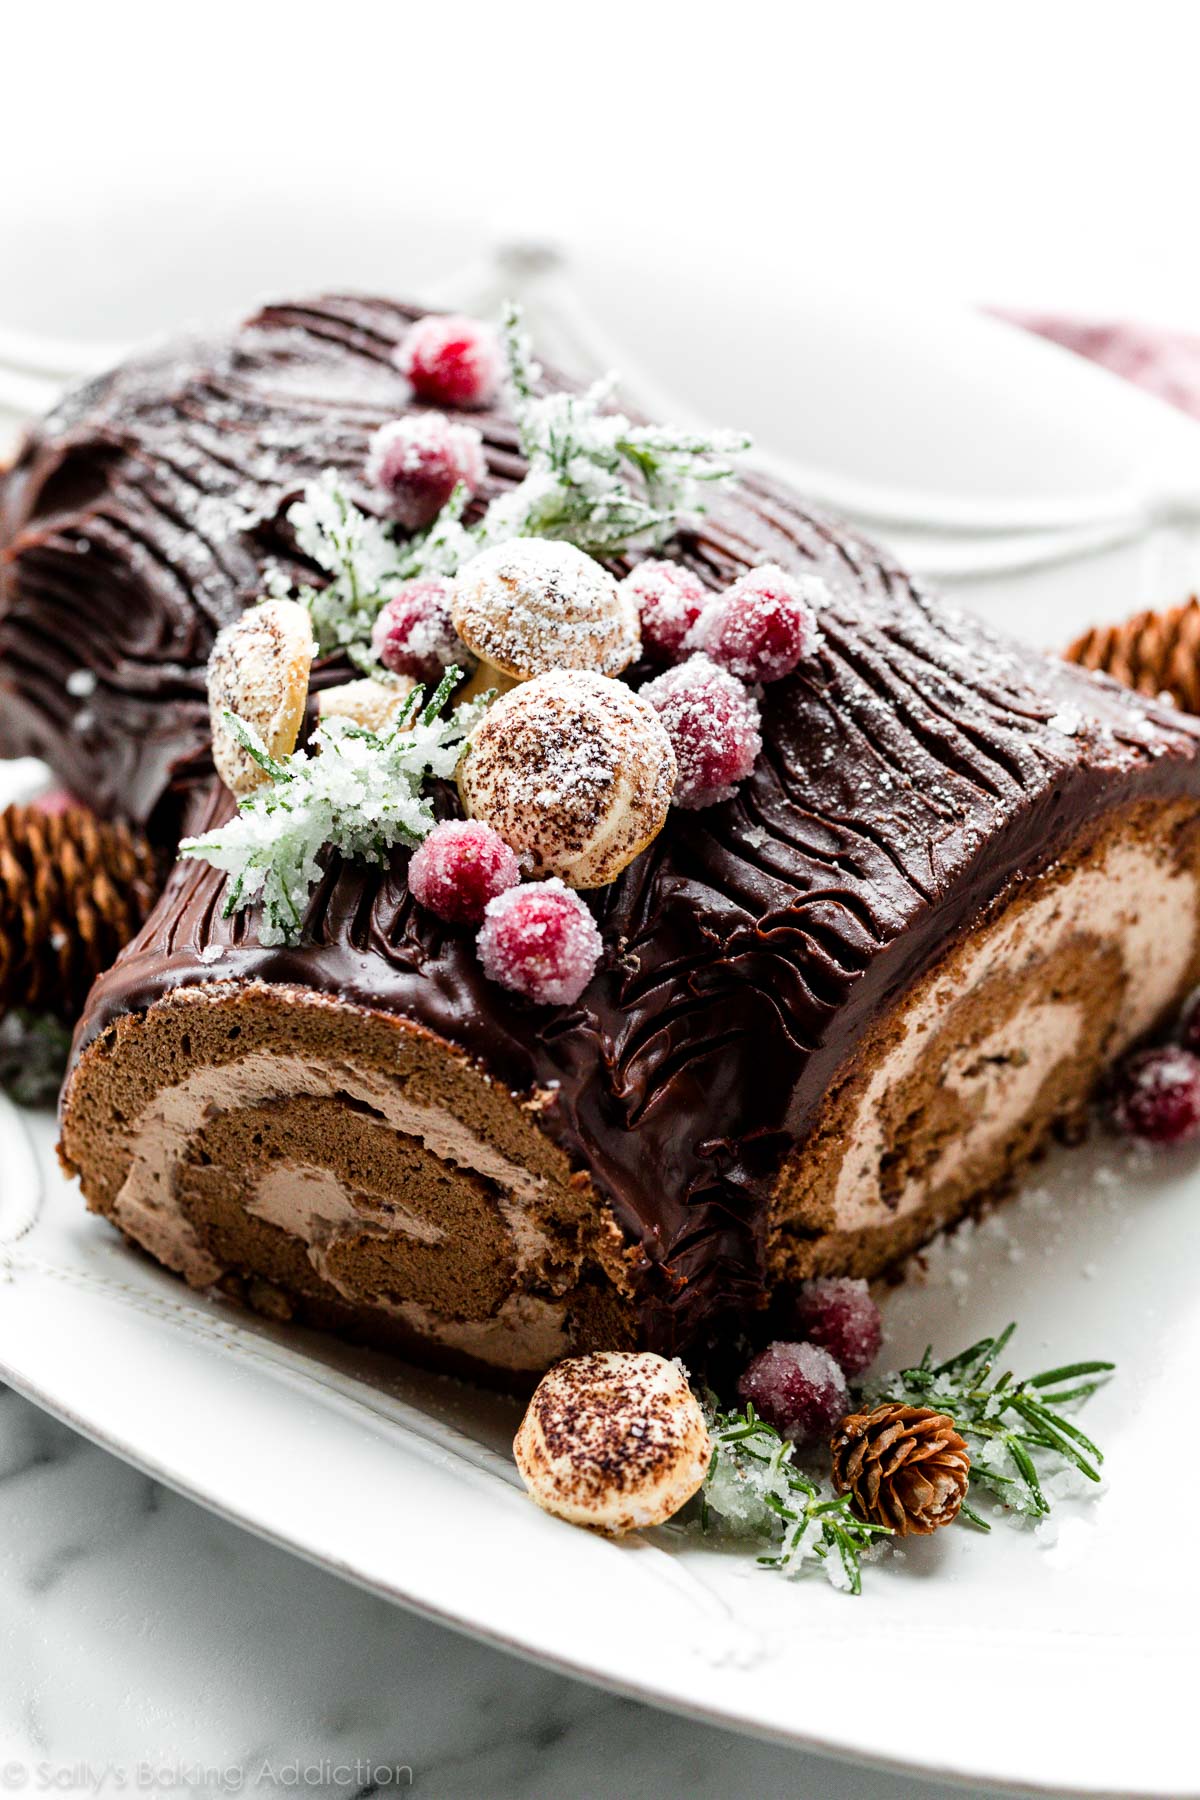 Peppermint Yule Log Cake Recipe | The Cake Boutique